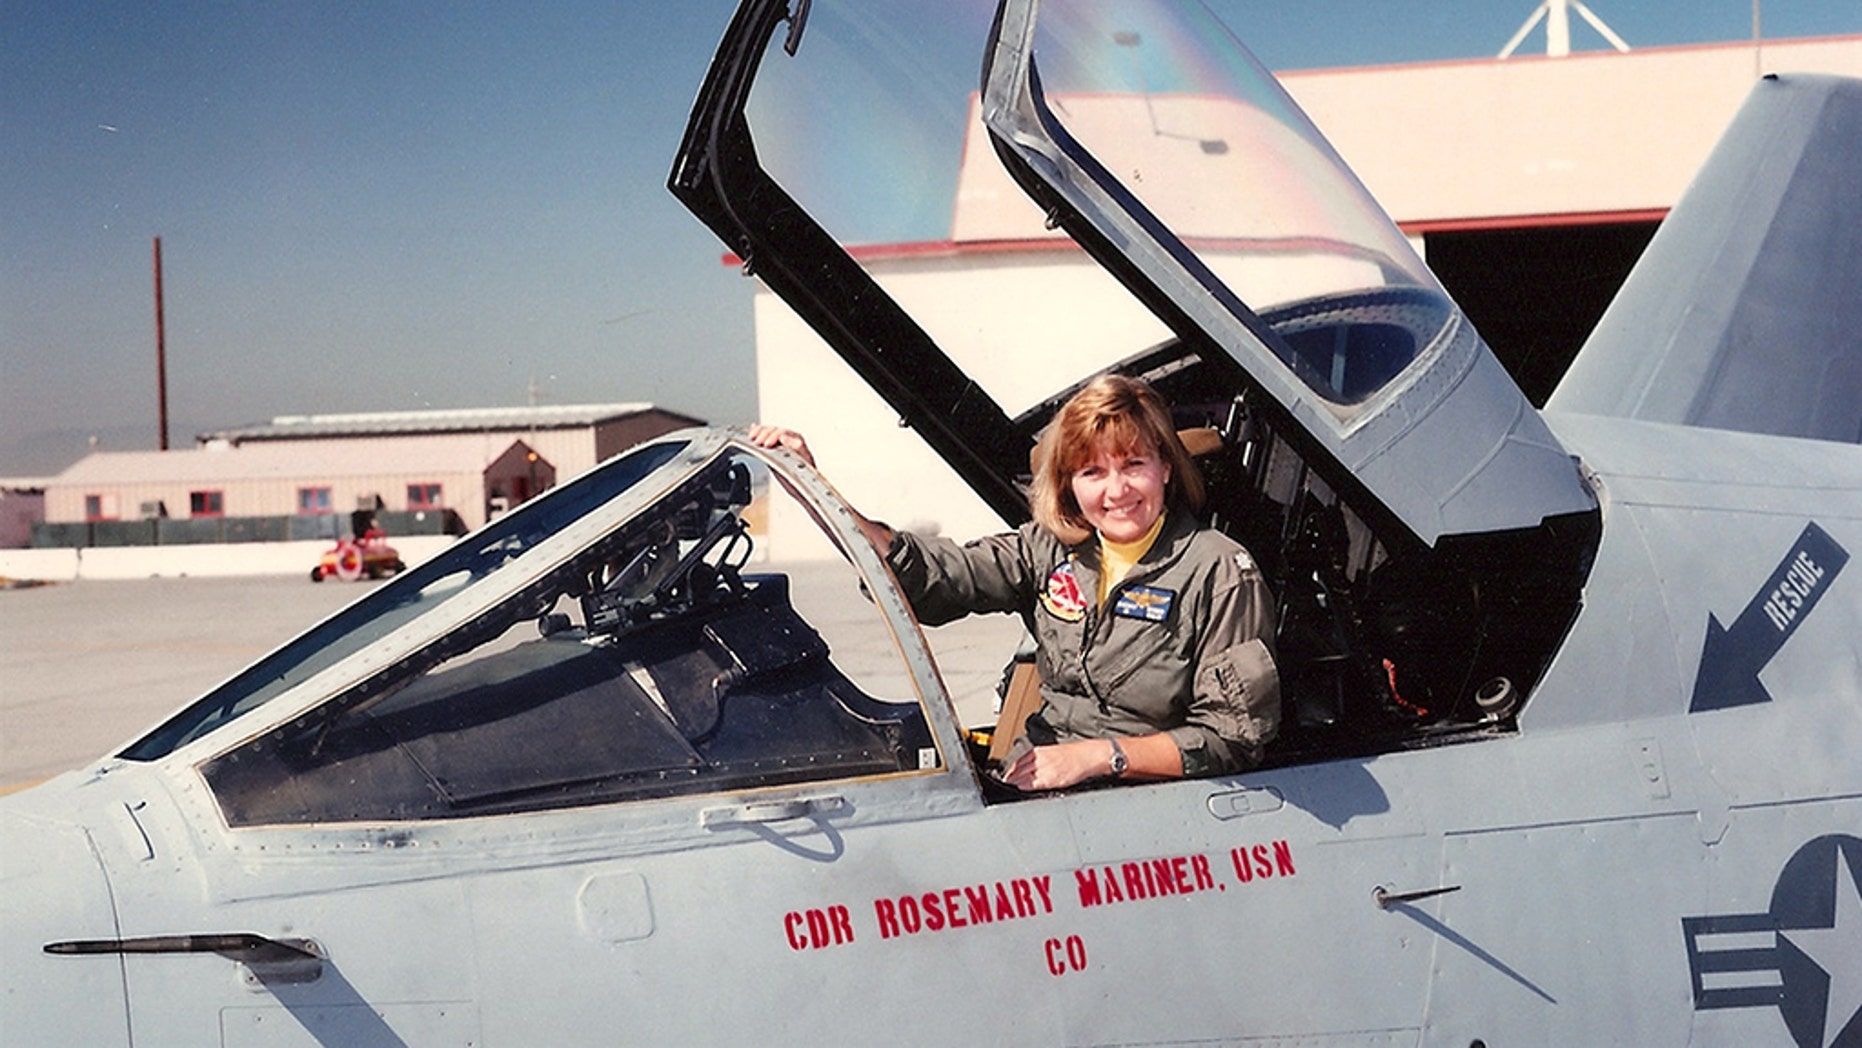 Rosemary Mariner, first woman to fly tactical fighter jet for Navy, dead at 65